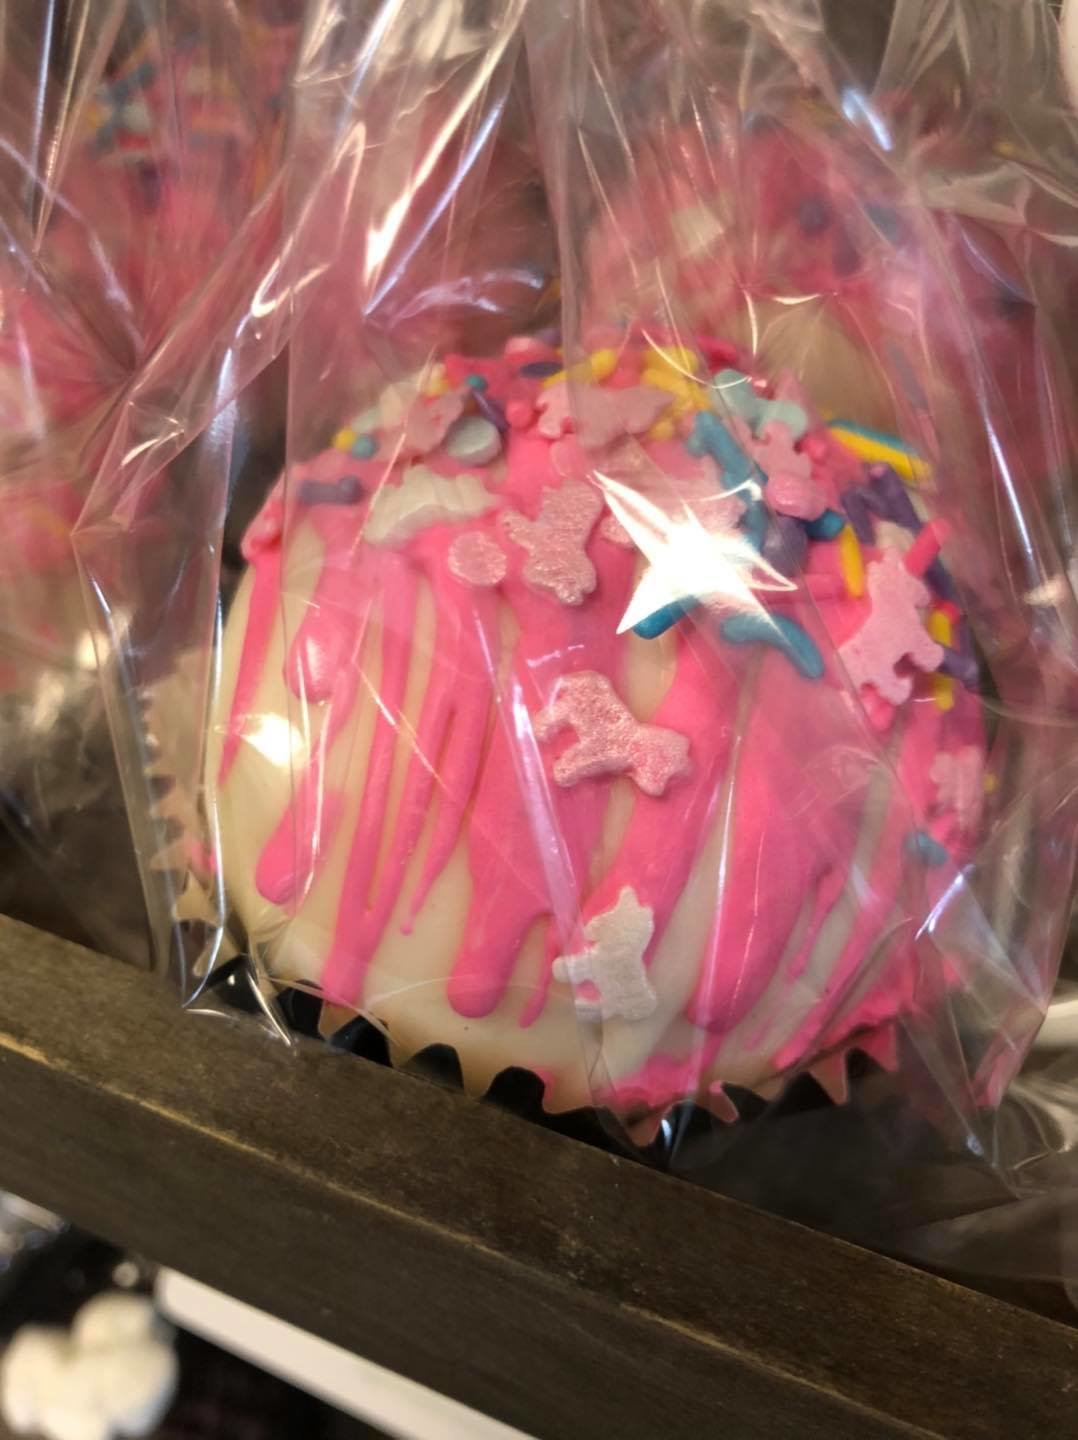 Sugar House Custom Cakes in Fairhope has hot chocolate bombs in store every day, but they go quick so get there early. They make a variety of flavors too like this strawberry unicorn.